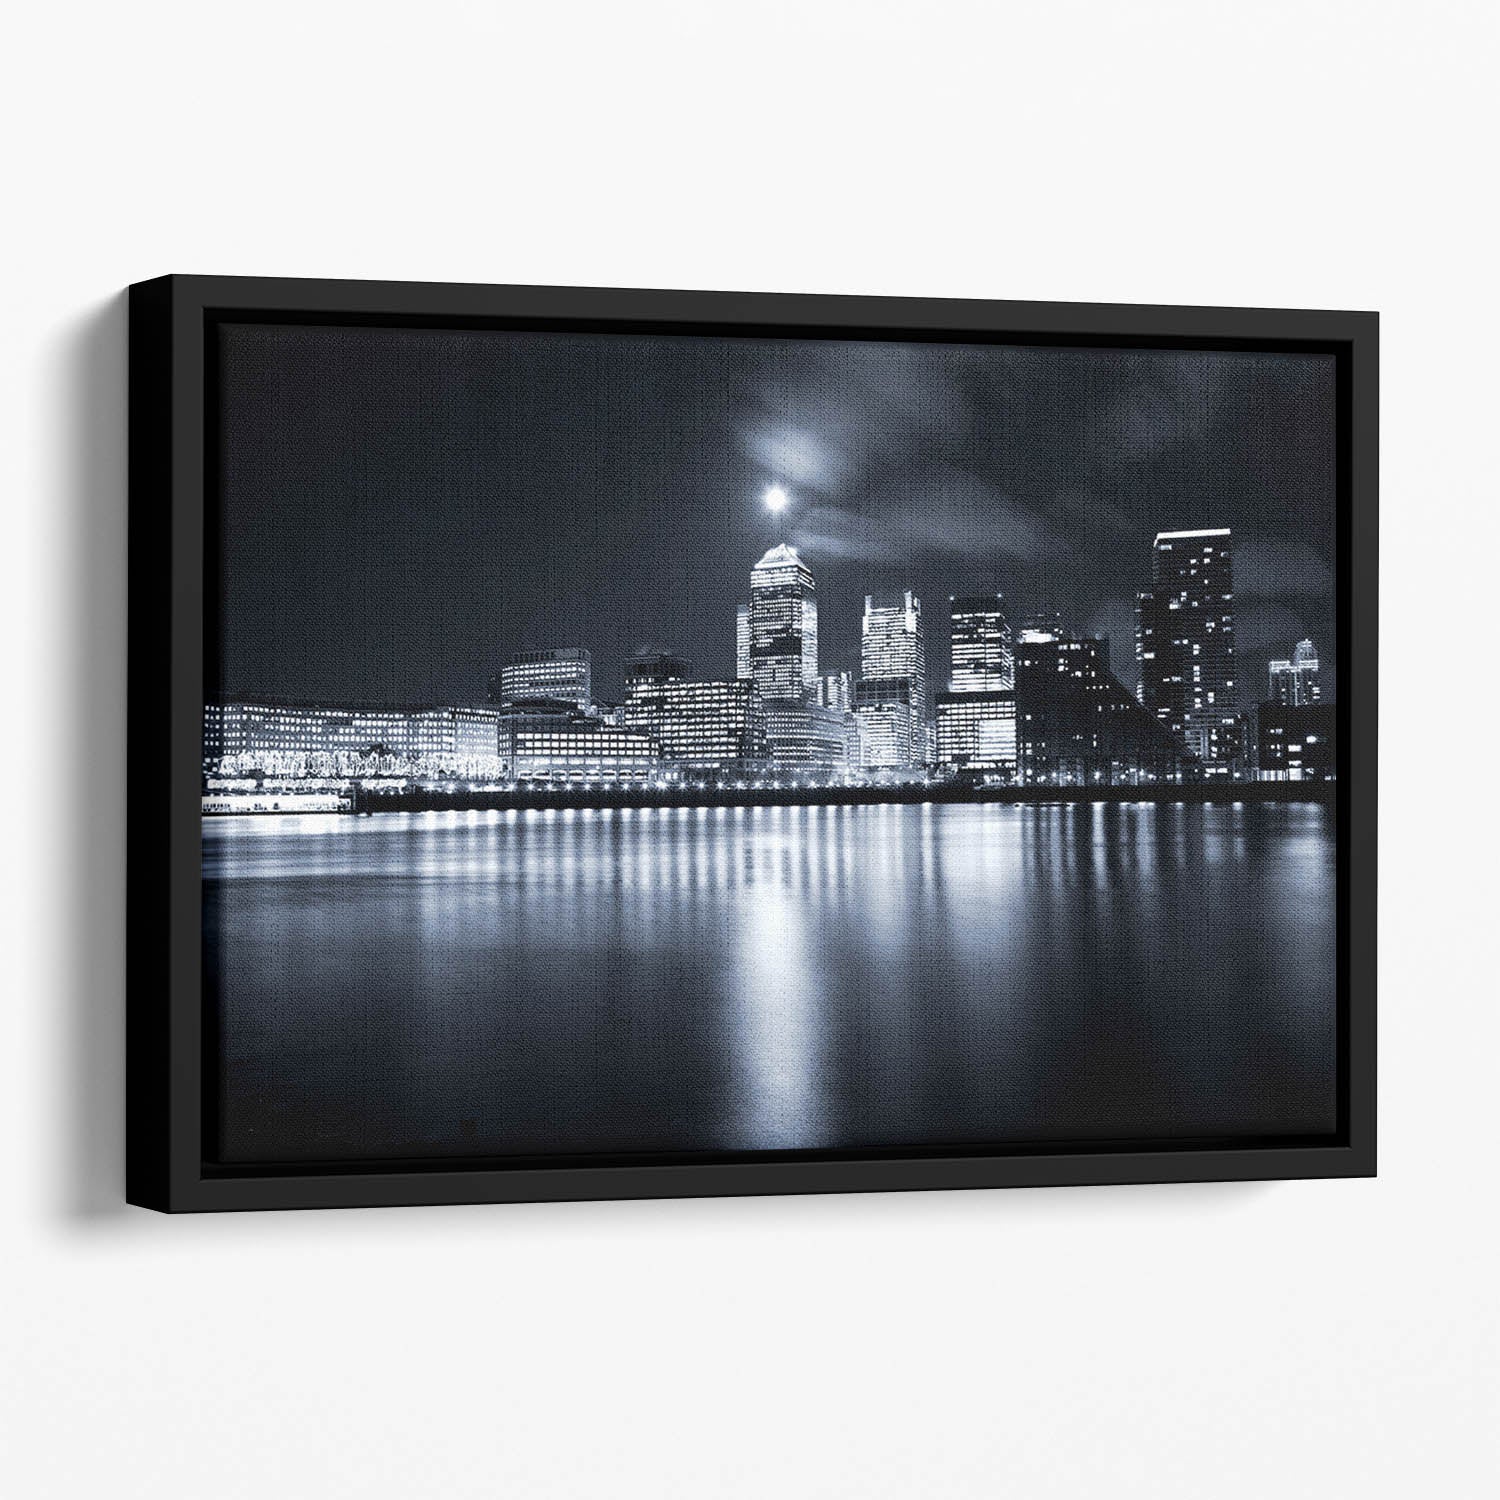 Full moon over London skyscrapers Floating Framed Canvas